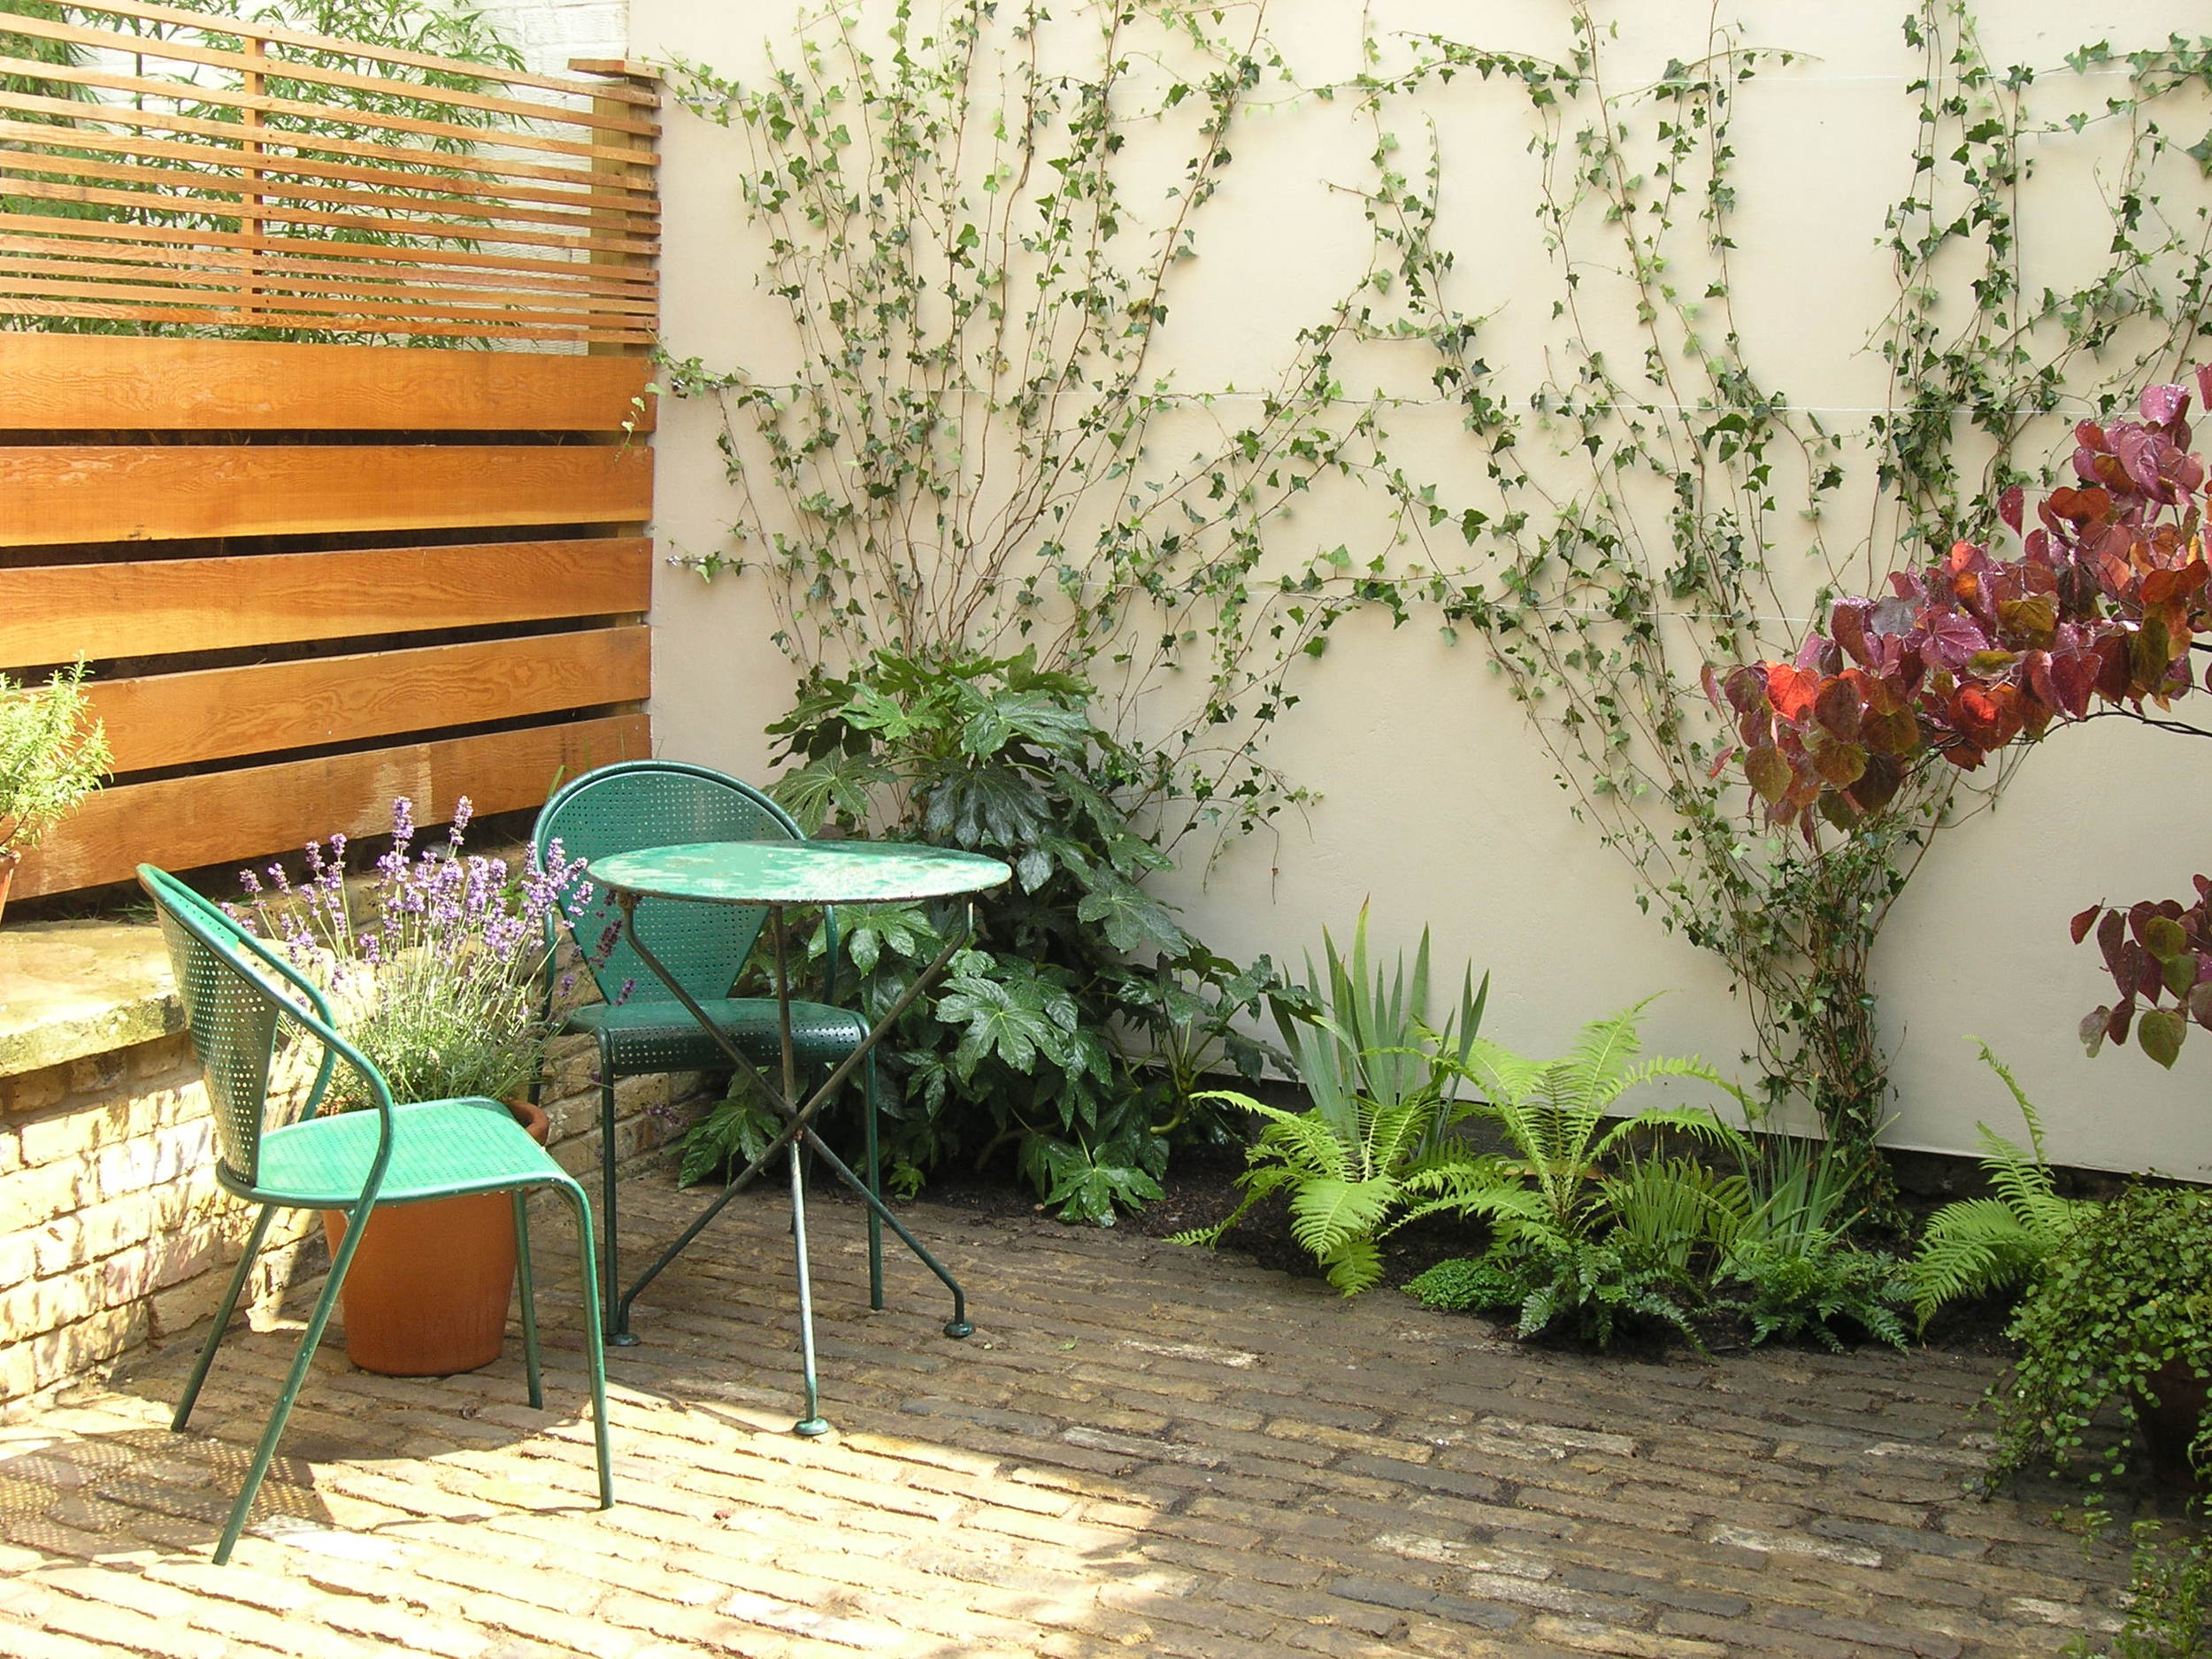  Small courtyard garden in North London redesigned by Living Gardens with bespoke planting scheme and seating area on a patio made from reclaimed bricks. 